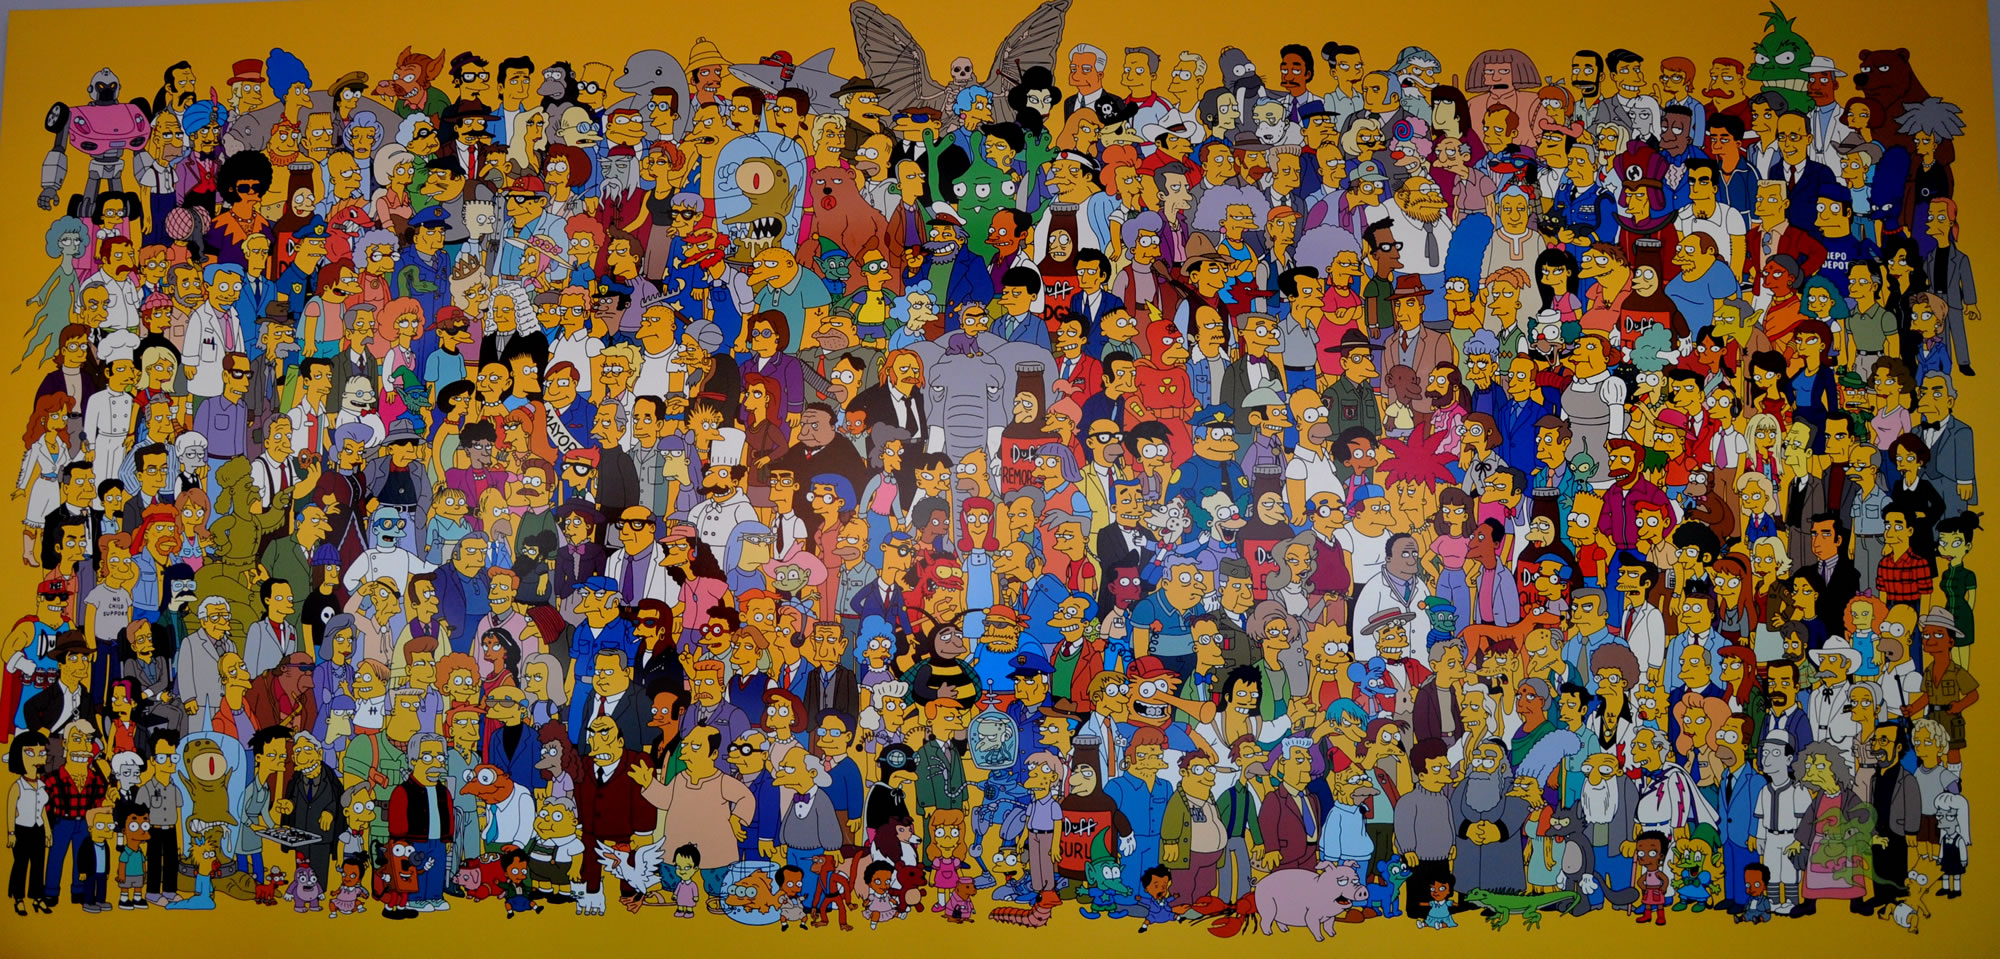 the simpsons family characters